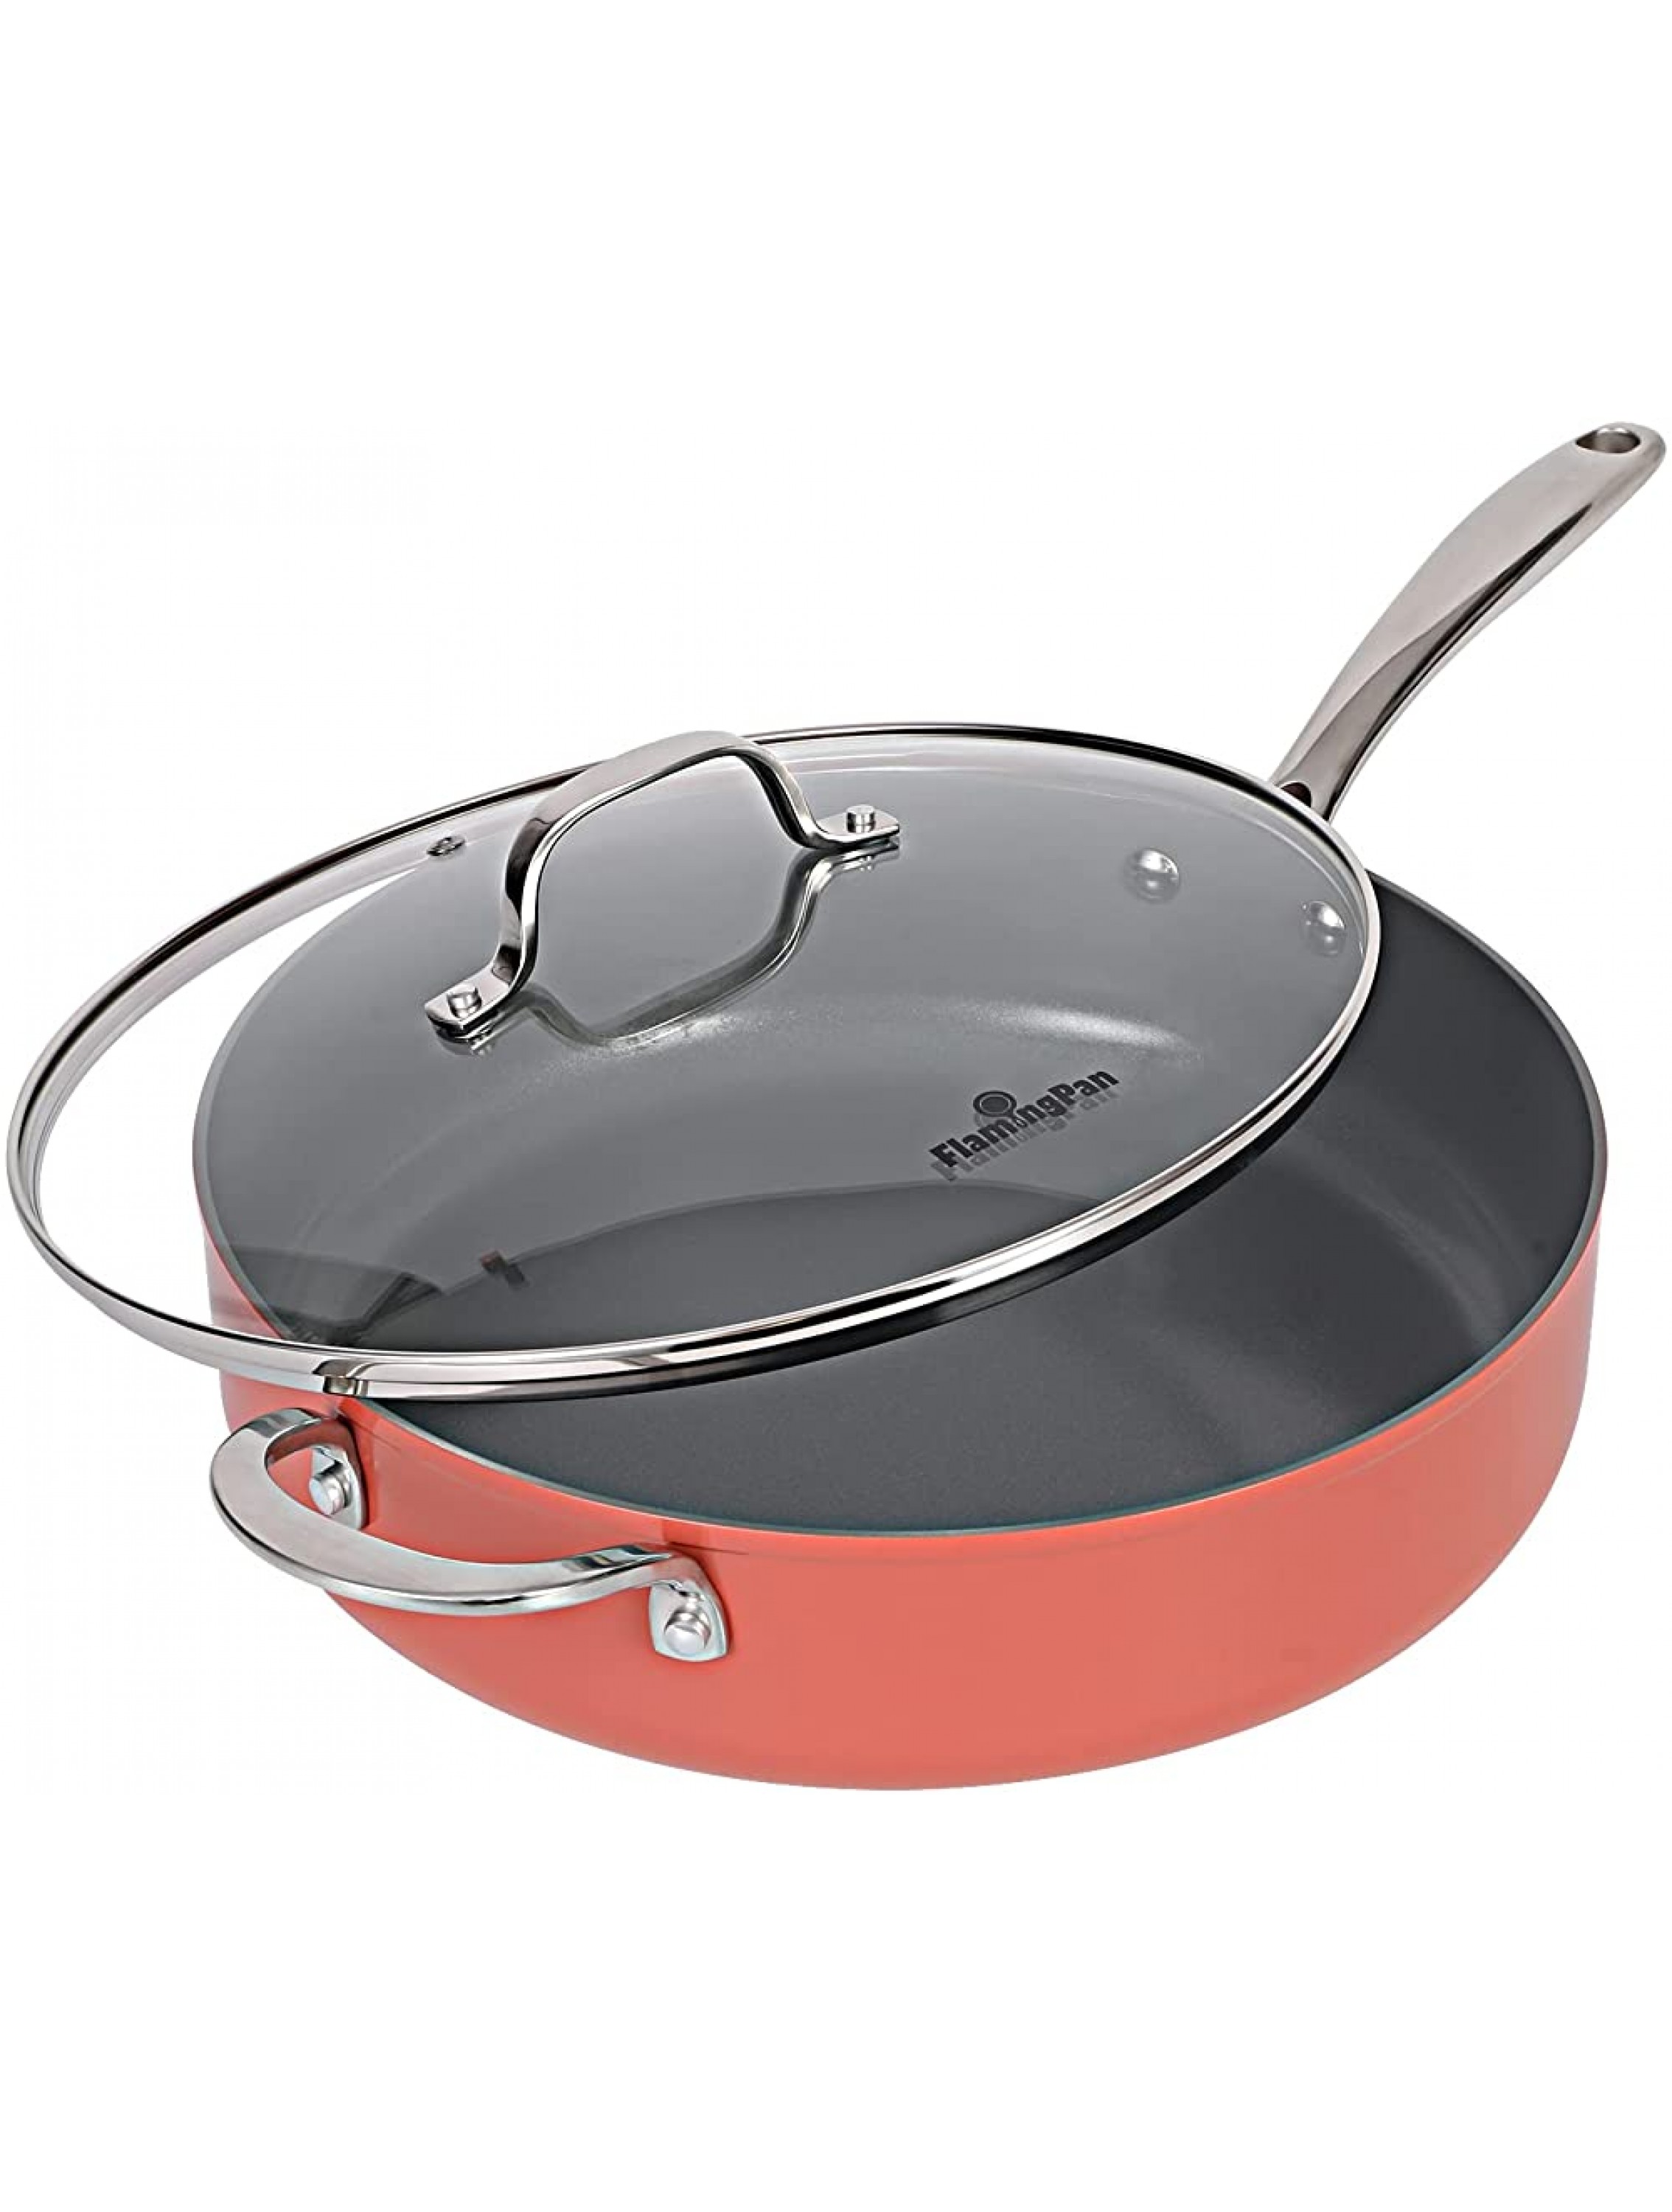 Flamingpan 12-Inch deep Nonstick Sauté Pan,Sauté Pan with Lid,Nonstick Frying Pan with Humanized Handle,Dishwasher & Oven Safe,Nonstick Sauté Pan Suitable for Any Cooktop,Chef's Pan for Home & Kitchen - BQQI28FT8